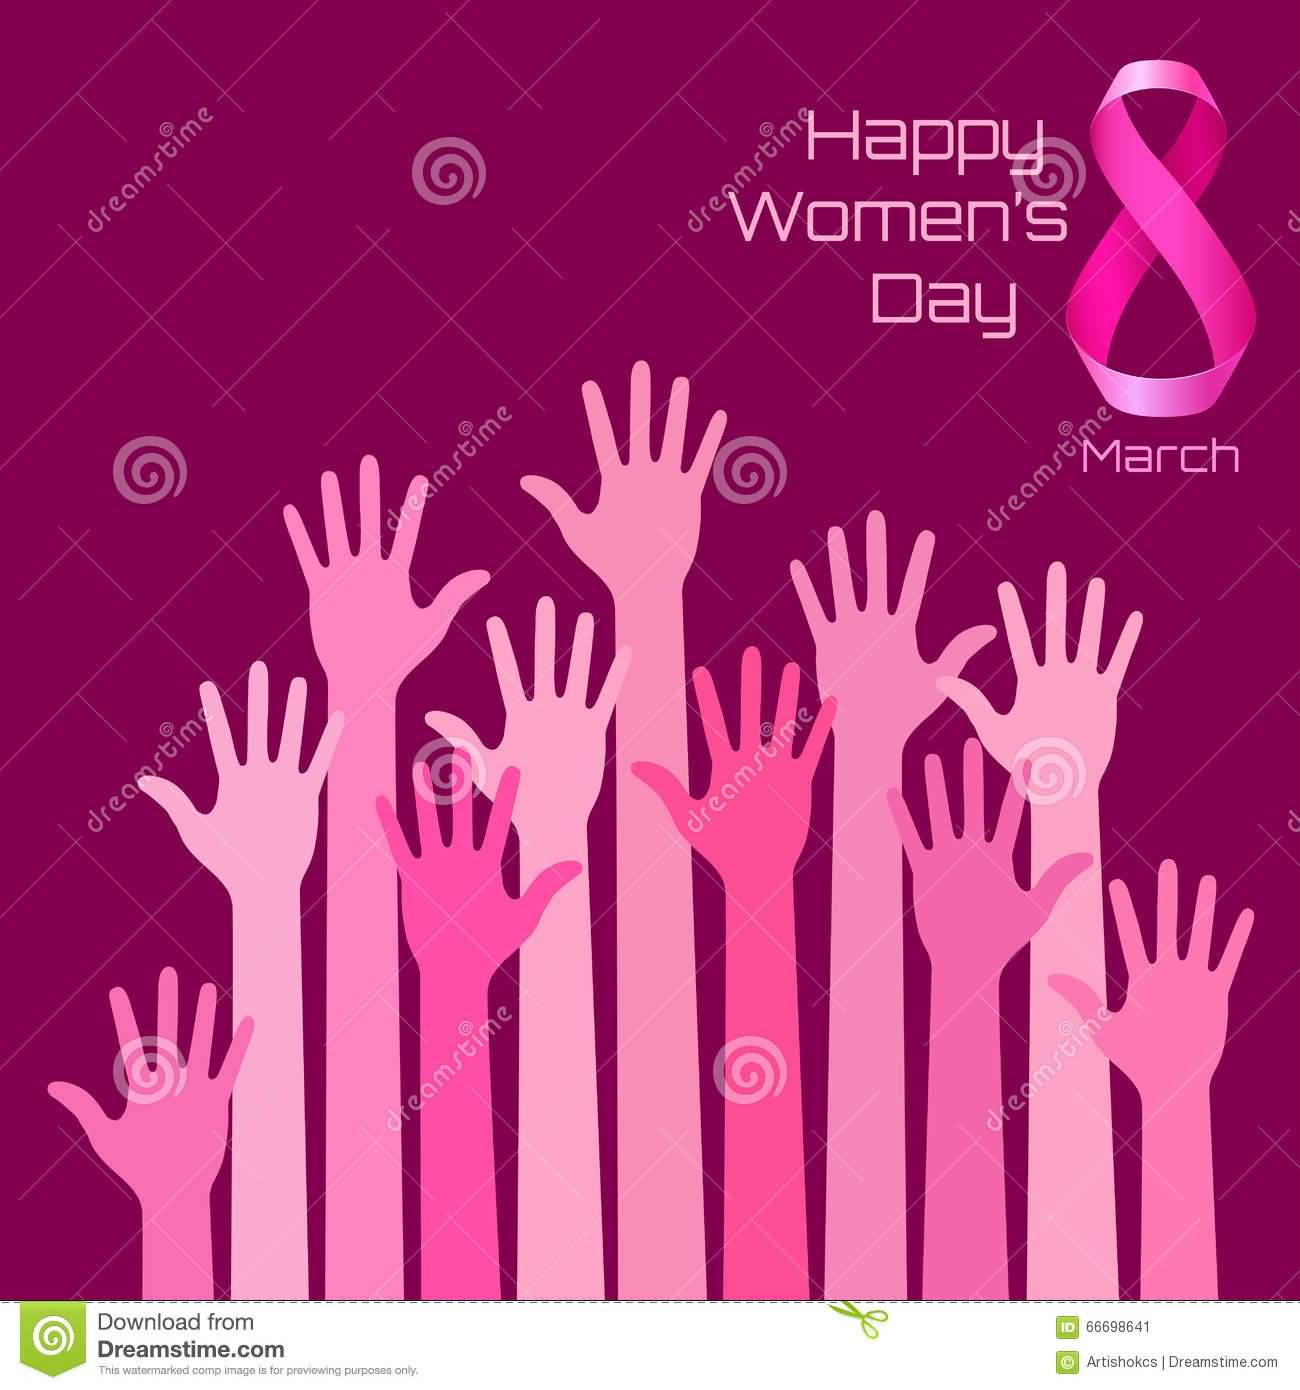 Happy Women’s Day 8 March Pink Hands Greeting Card Design